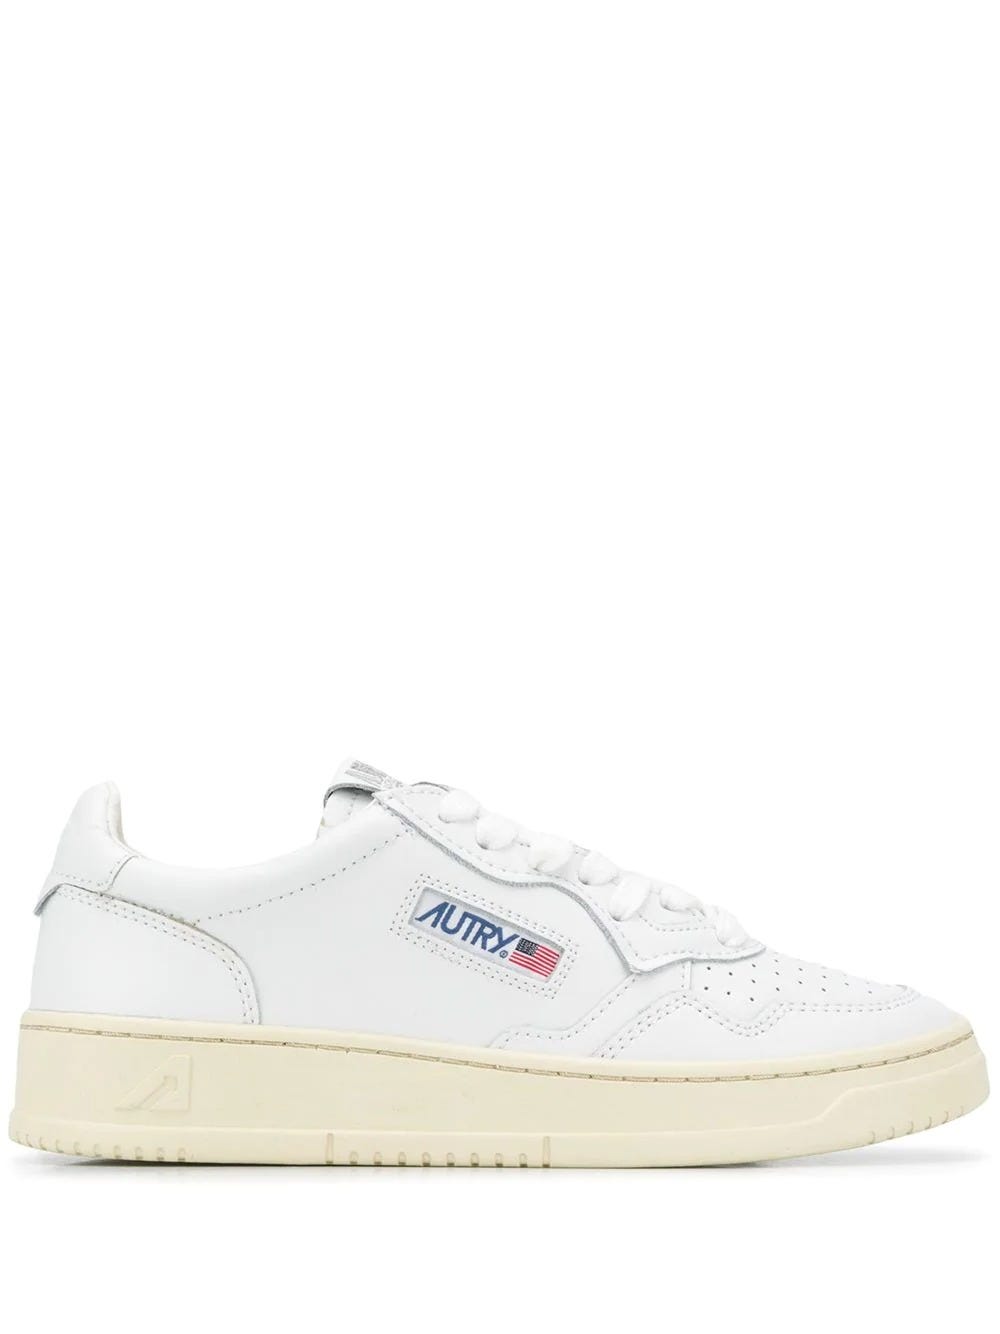 Autry Shoes Medalist Low White Leather Sneakers | ModeSens